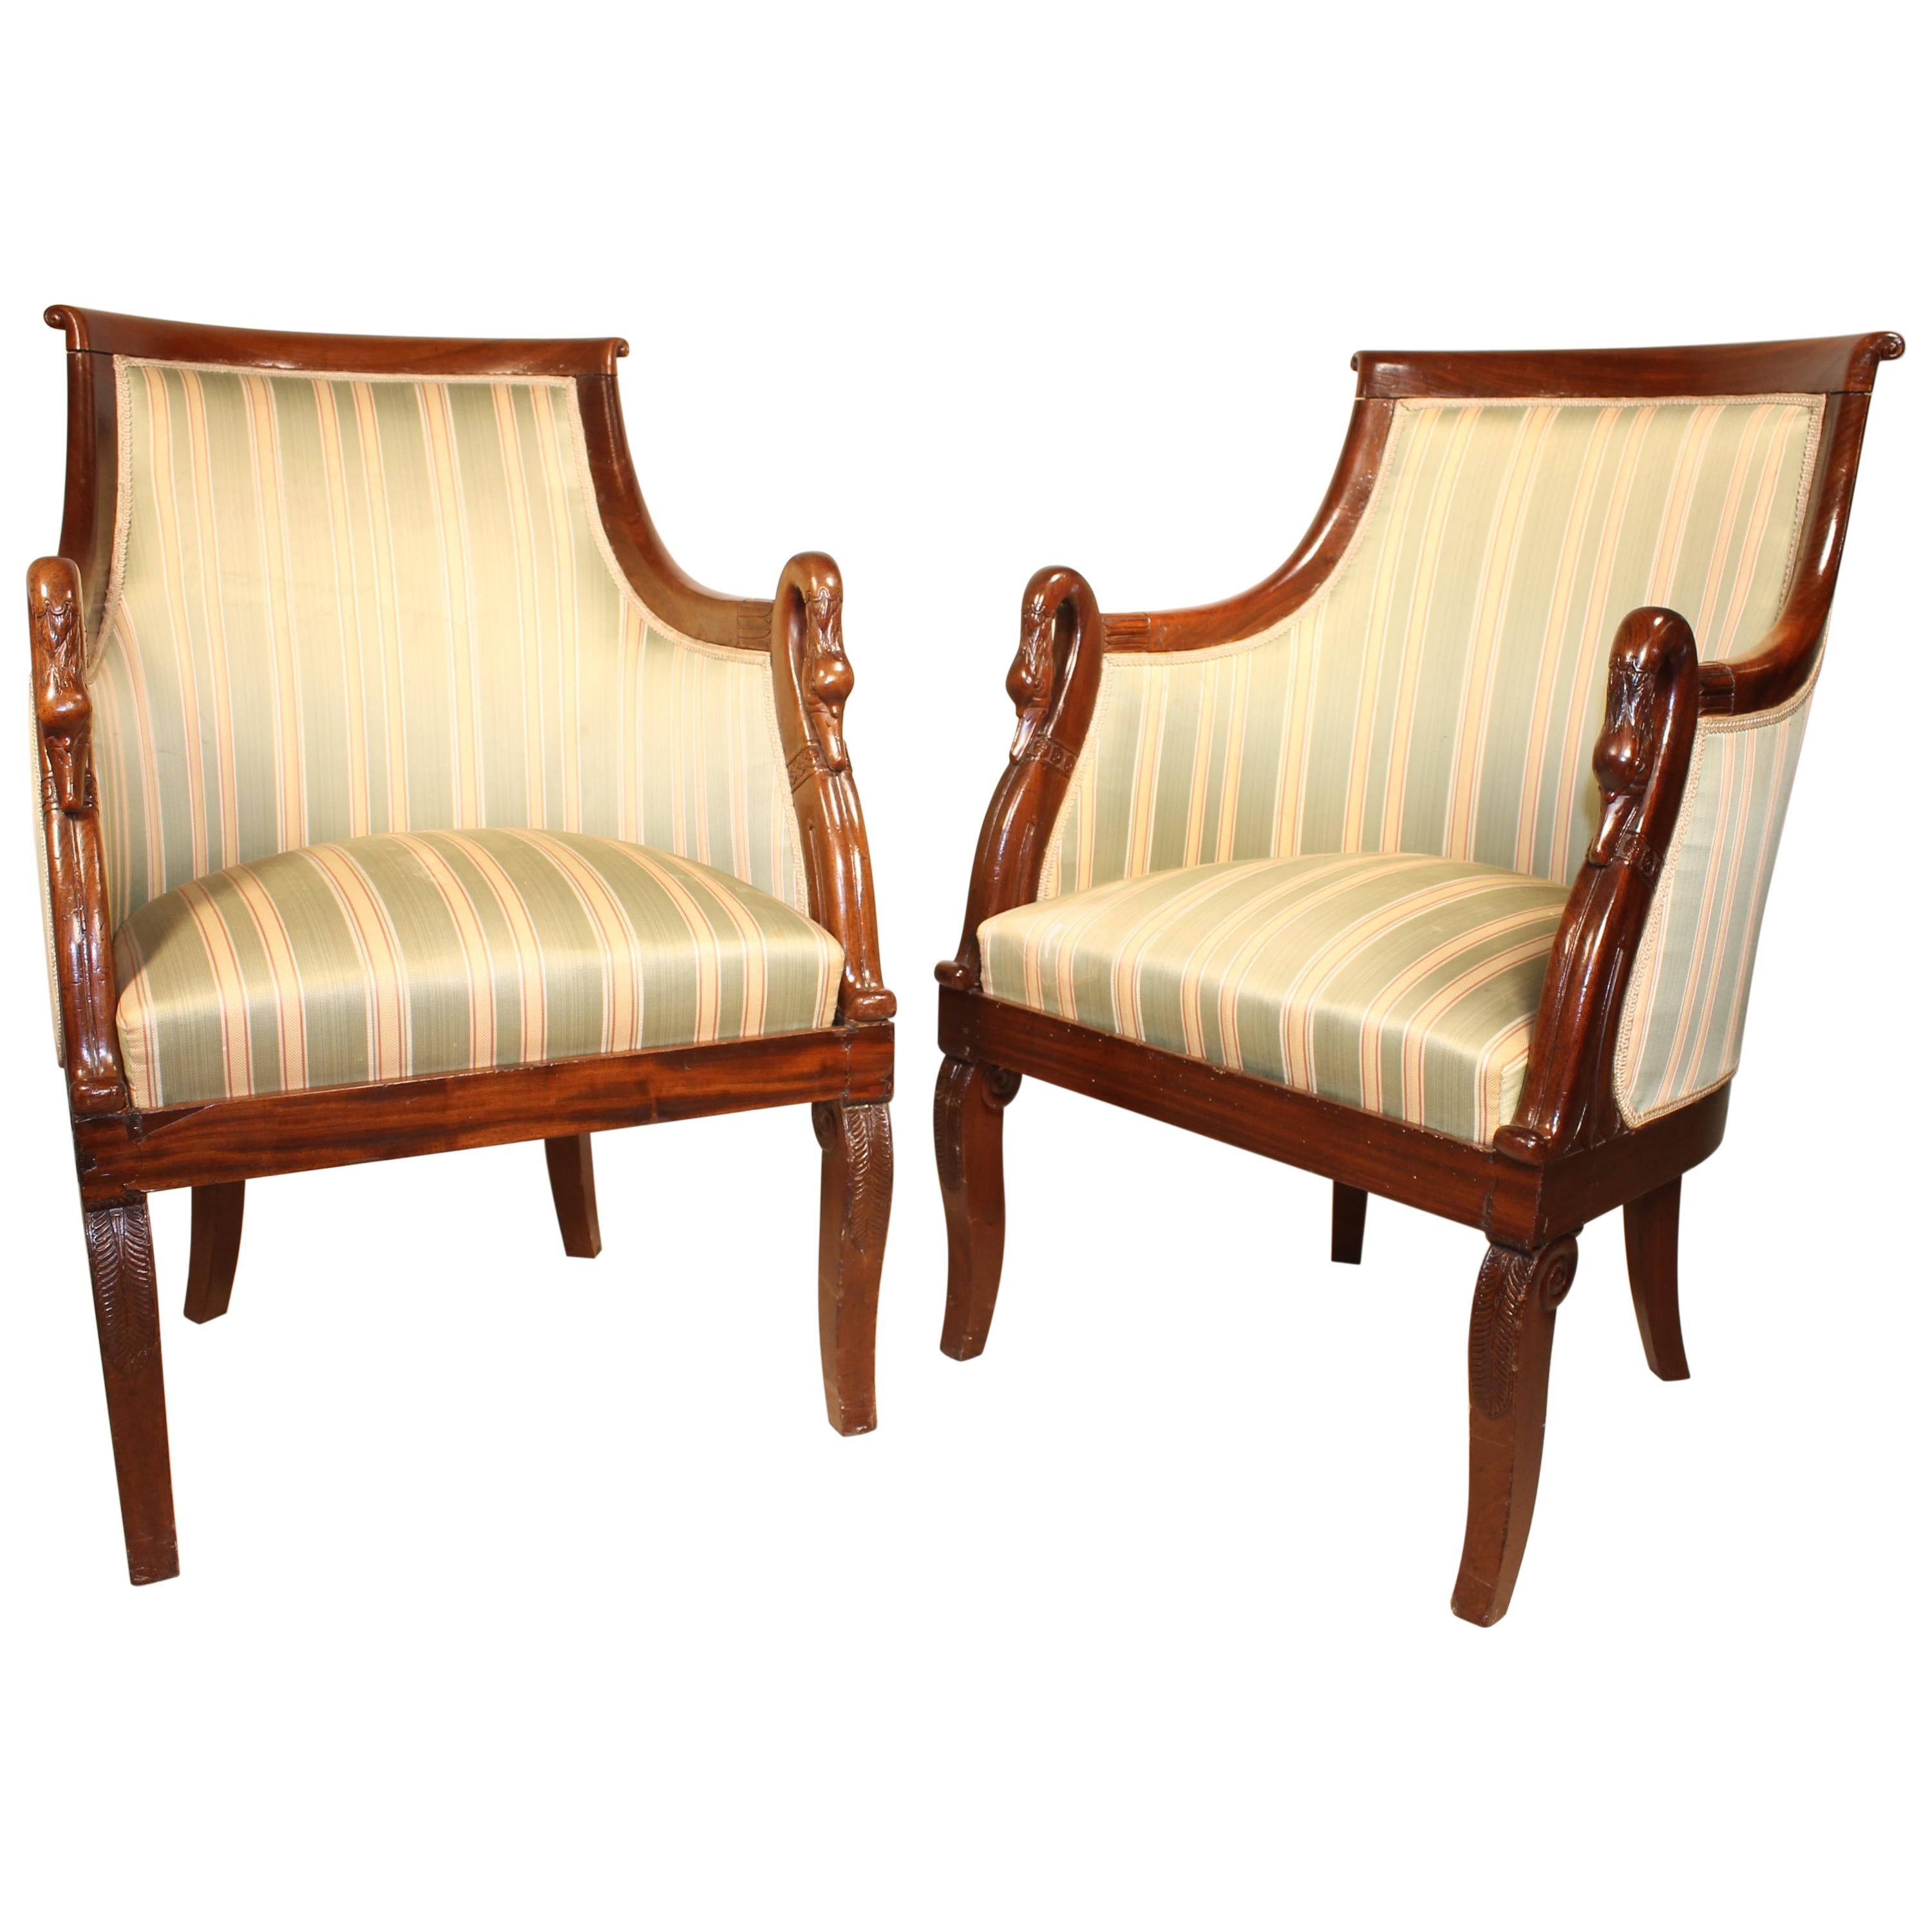 Pair of French Empire Armchairs in Mahogany